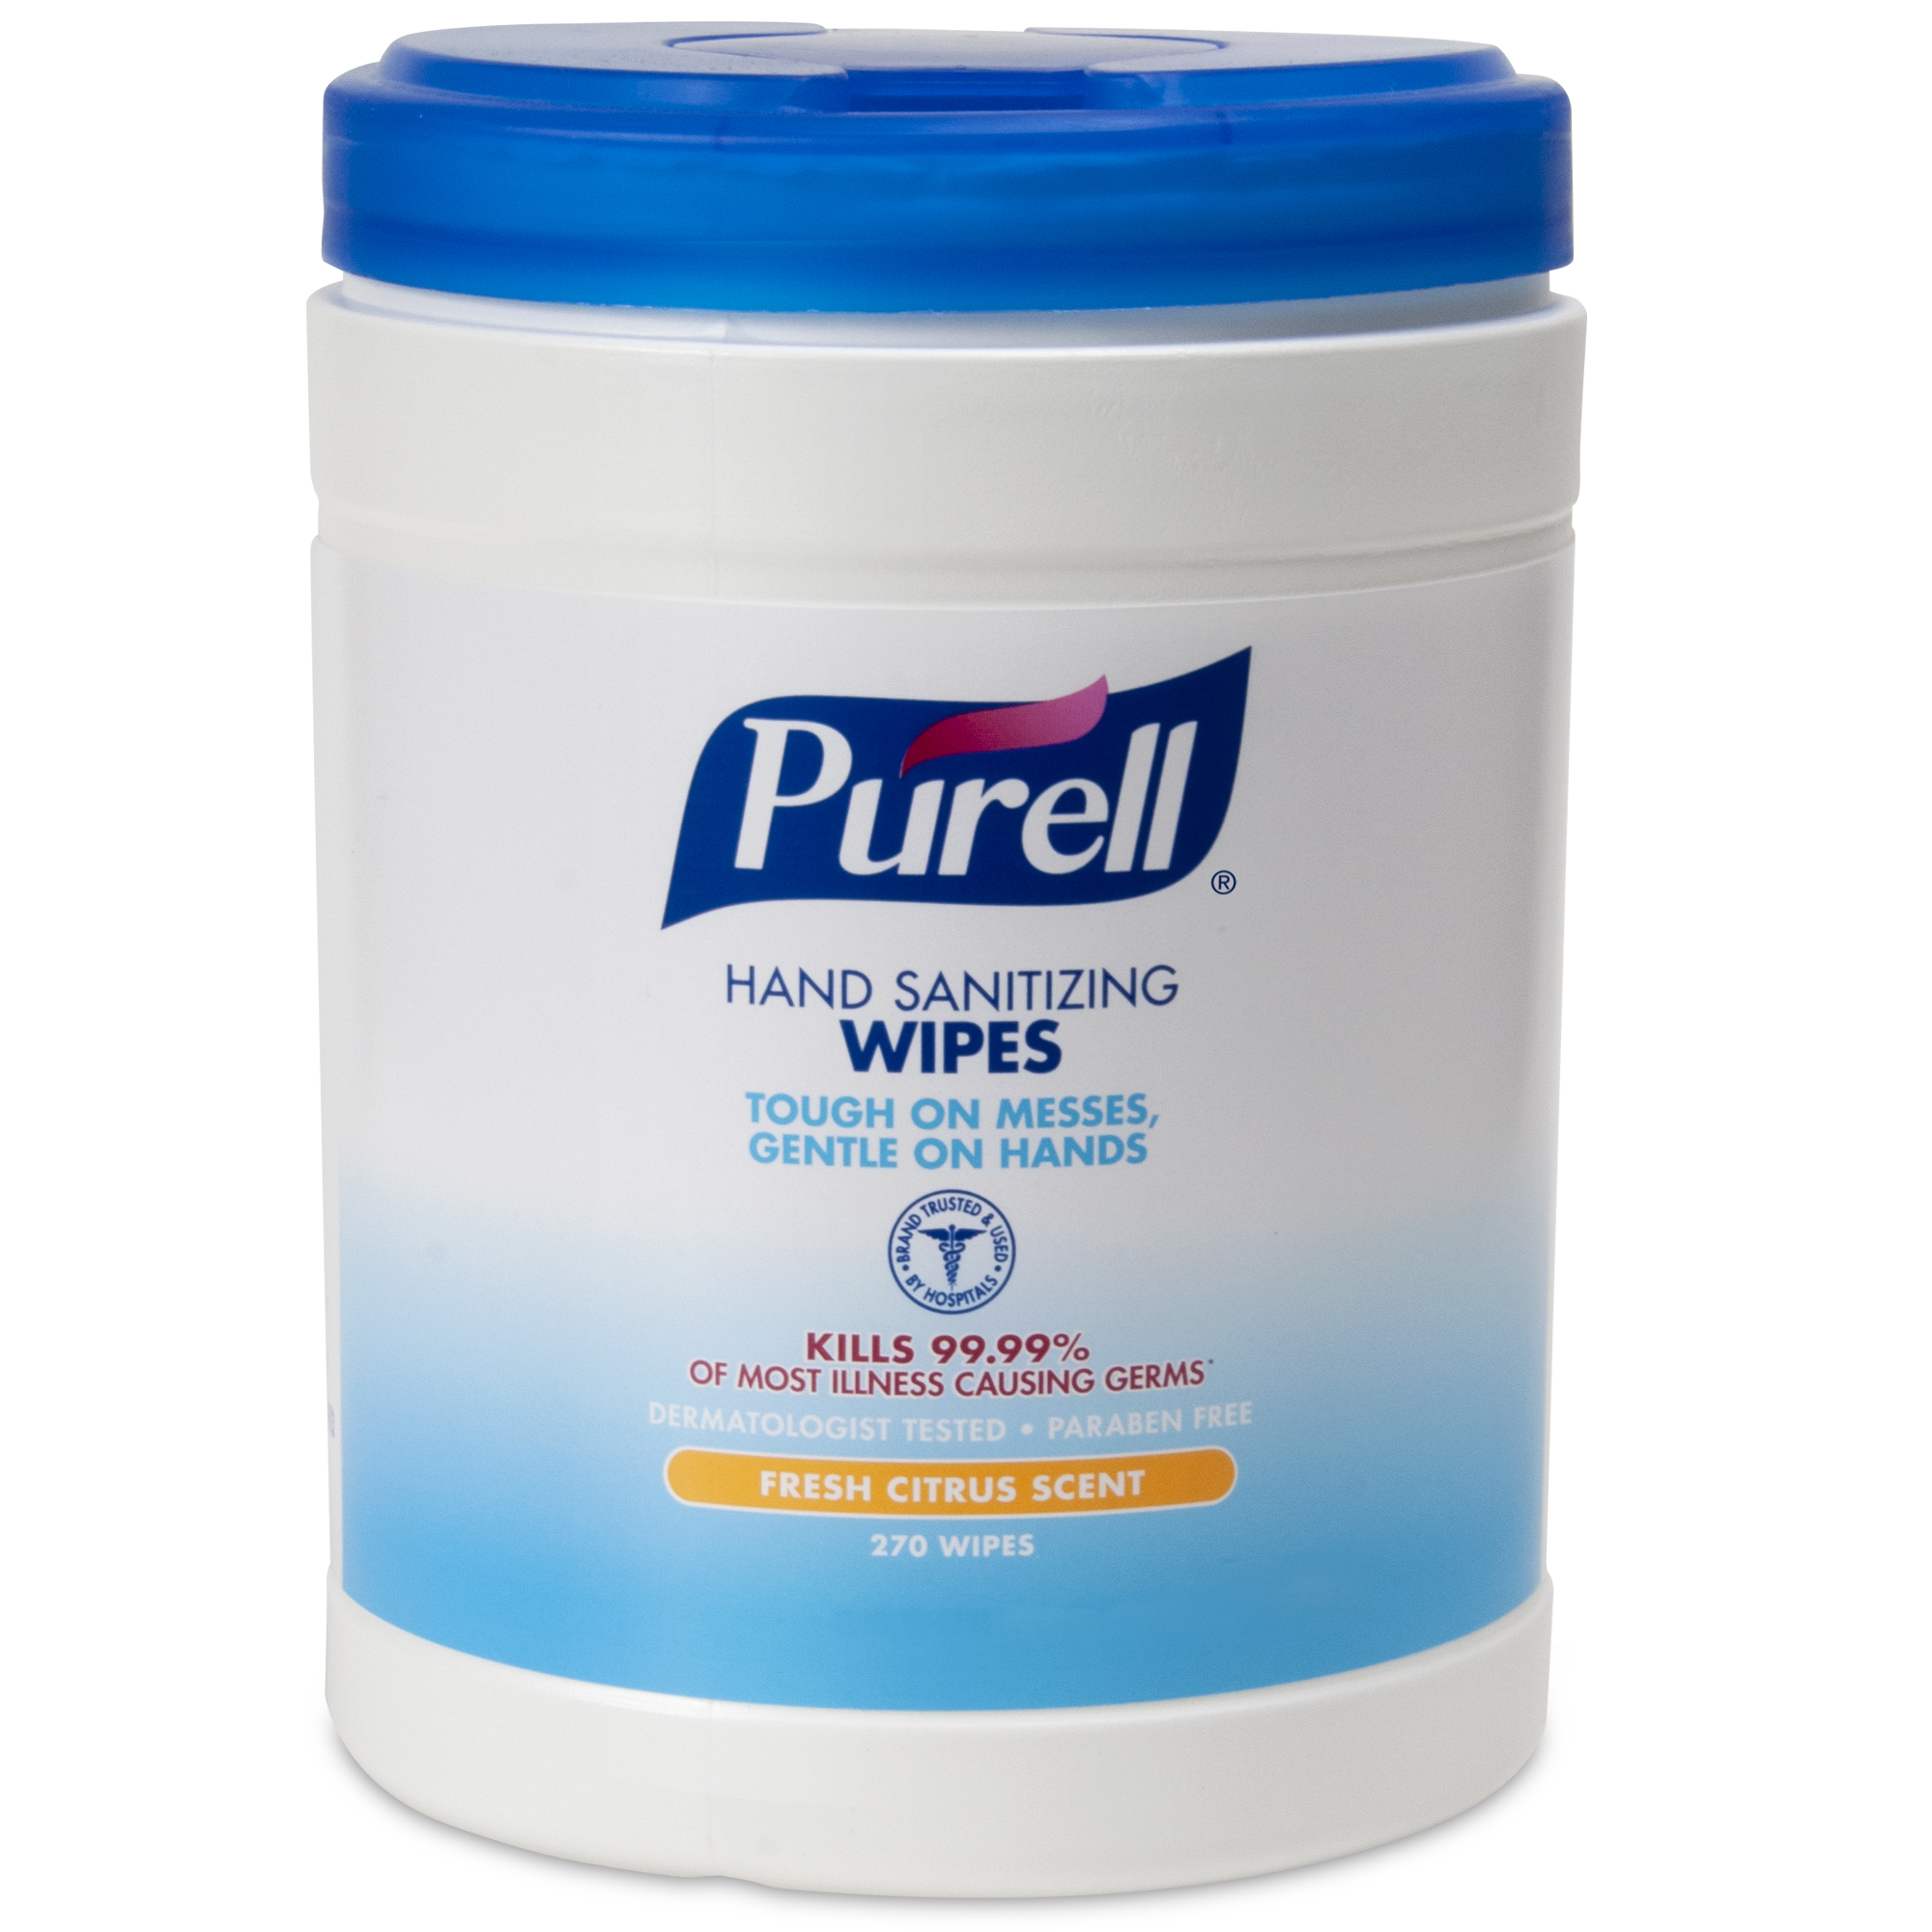 PURELL® Hand Sanitizing Wipes 270 Count